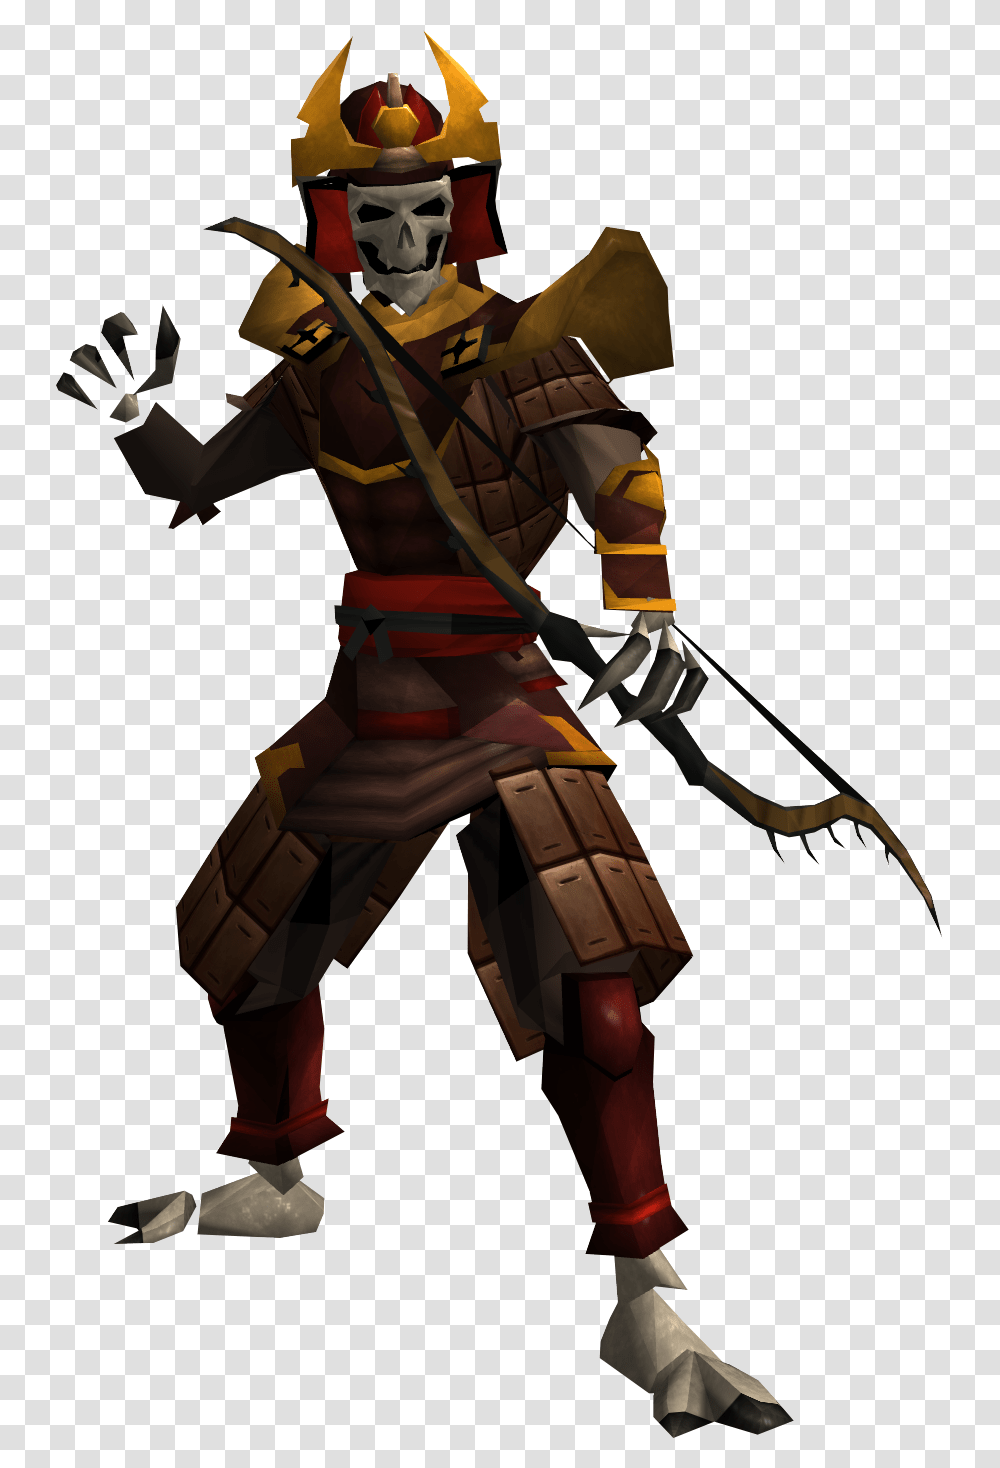 Samurai Outfit And Sword Runescape, Toy, Knight, Ninja Transparent Png